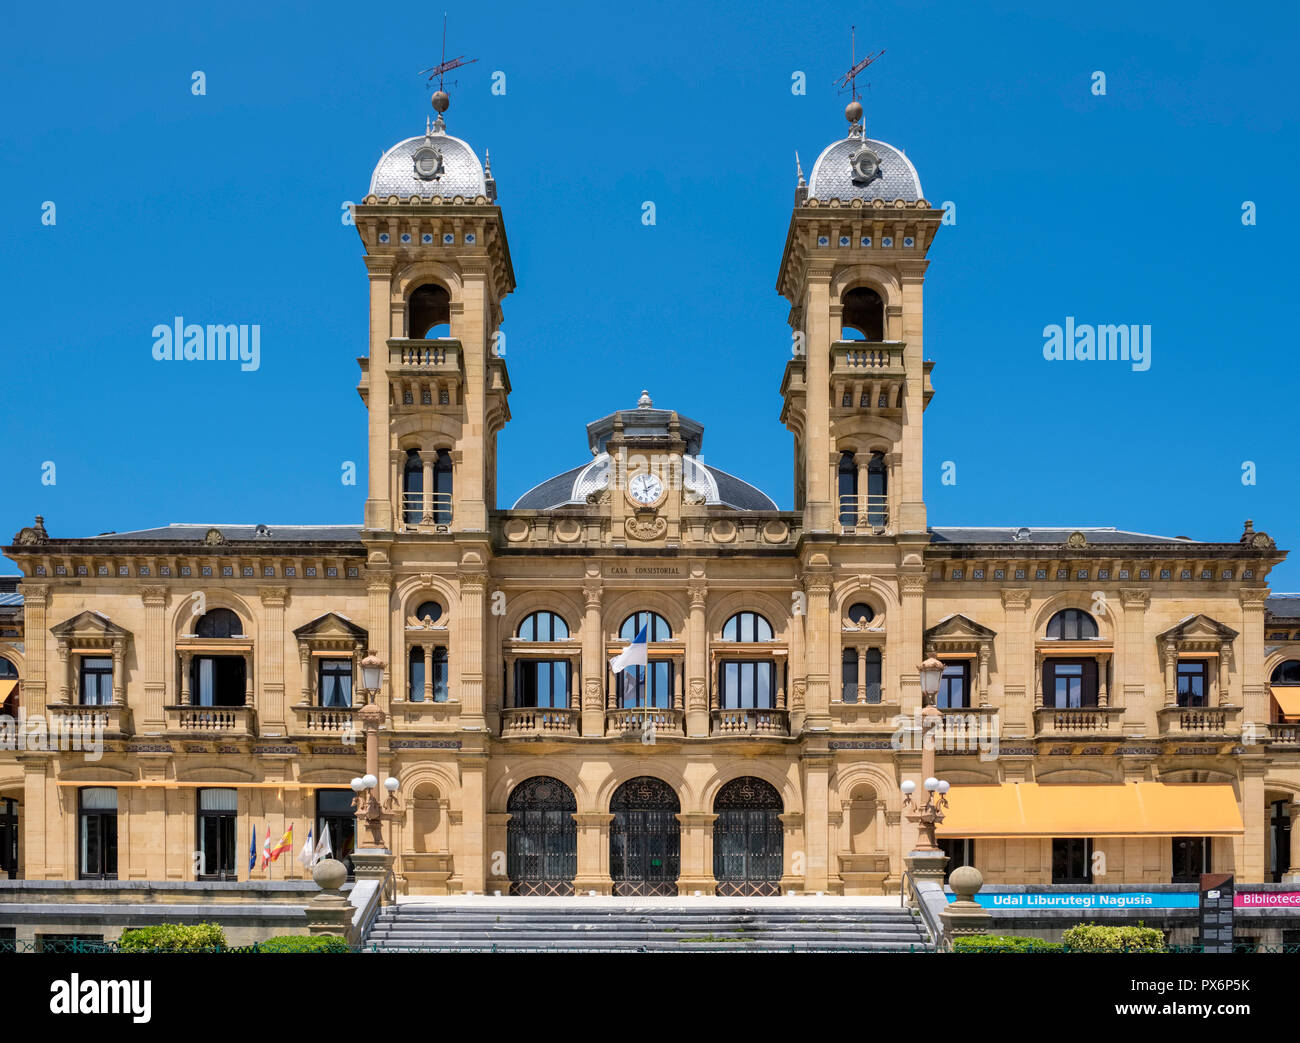 City Hall and Library, San Sebastian, Donostia, in the Basque Country, Spain, Europe Stock Photo